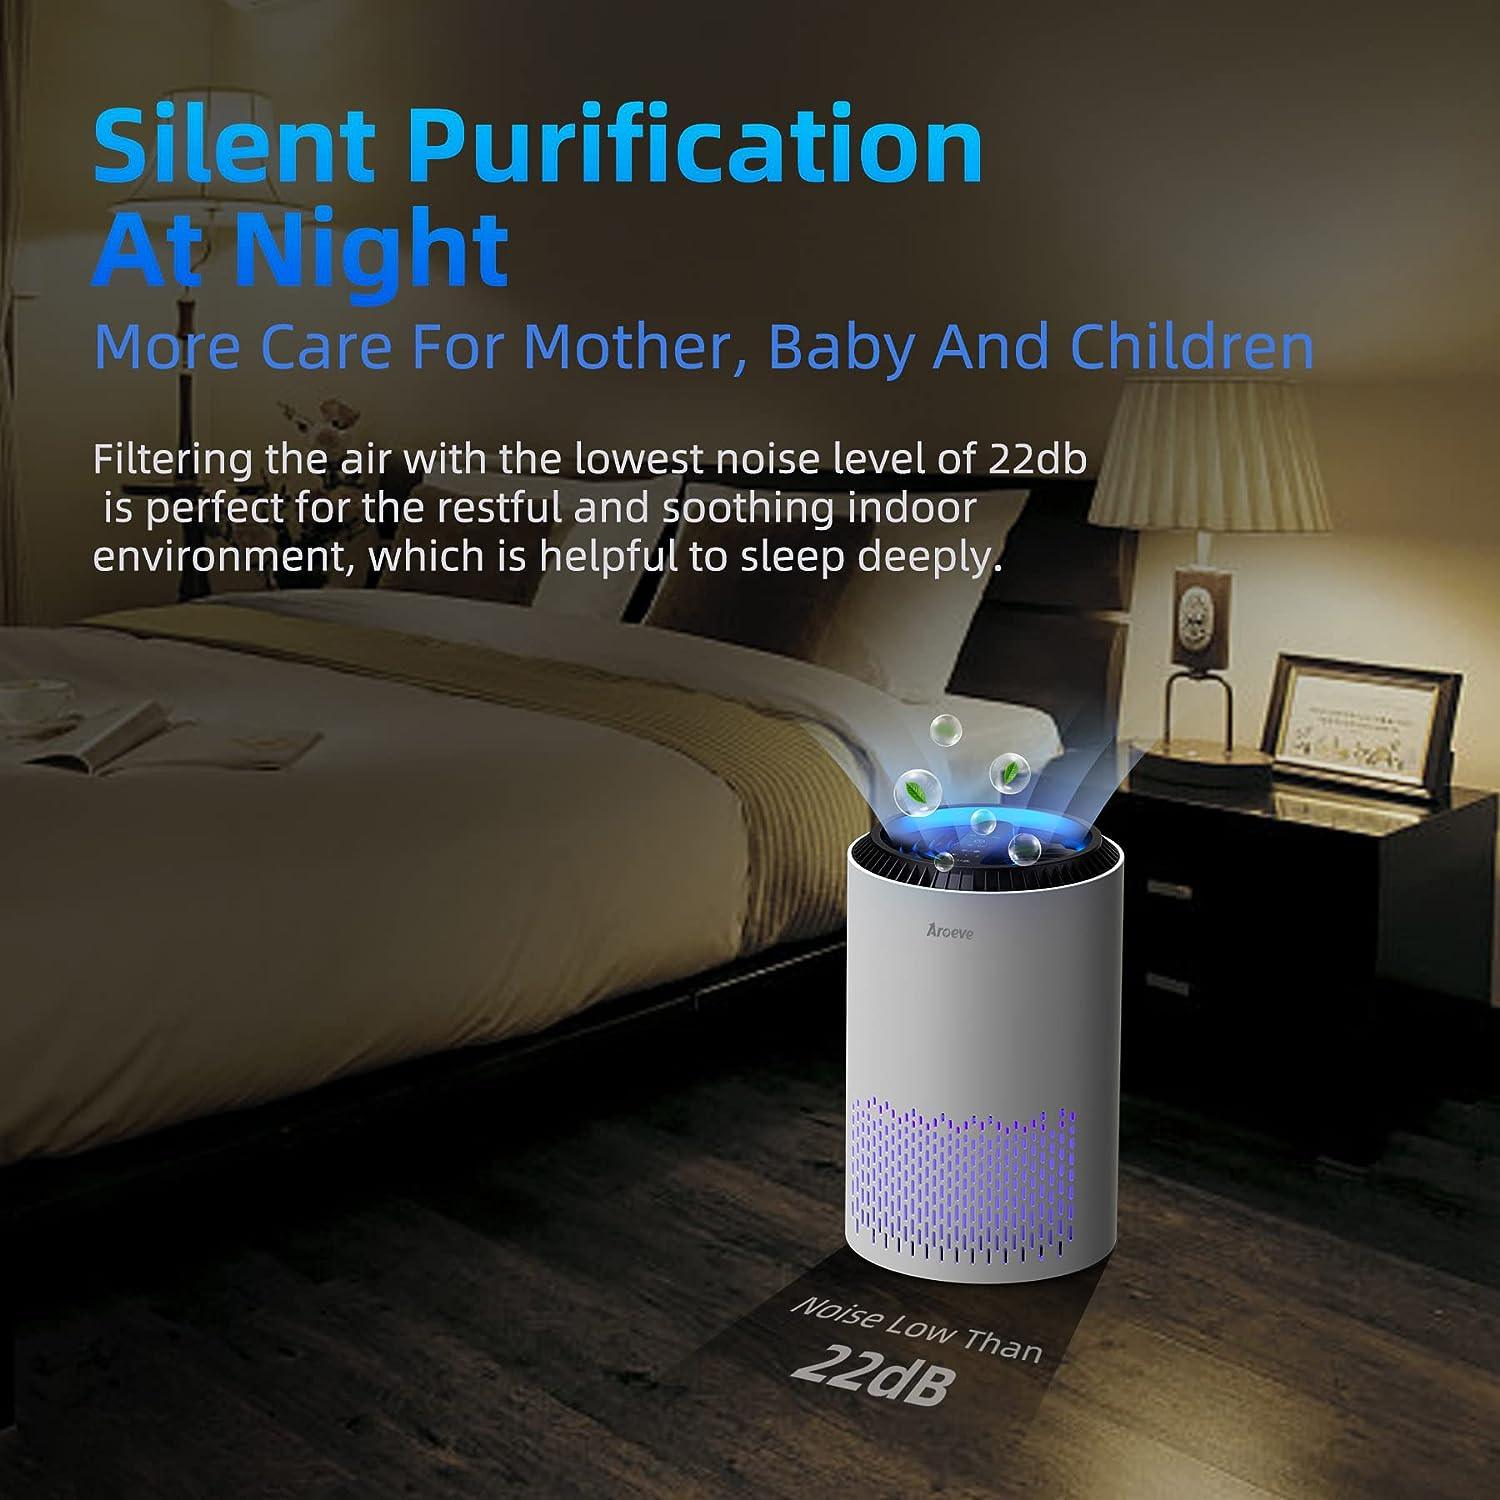 ARO MK01 White Air Purifier: Compact HEPA Cleaner for Smoke, Pollen, Odors & More - Ideal for Bedrooms, Offices, Living Rooms. - TheGivenGet